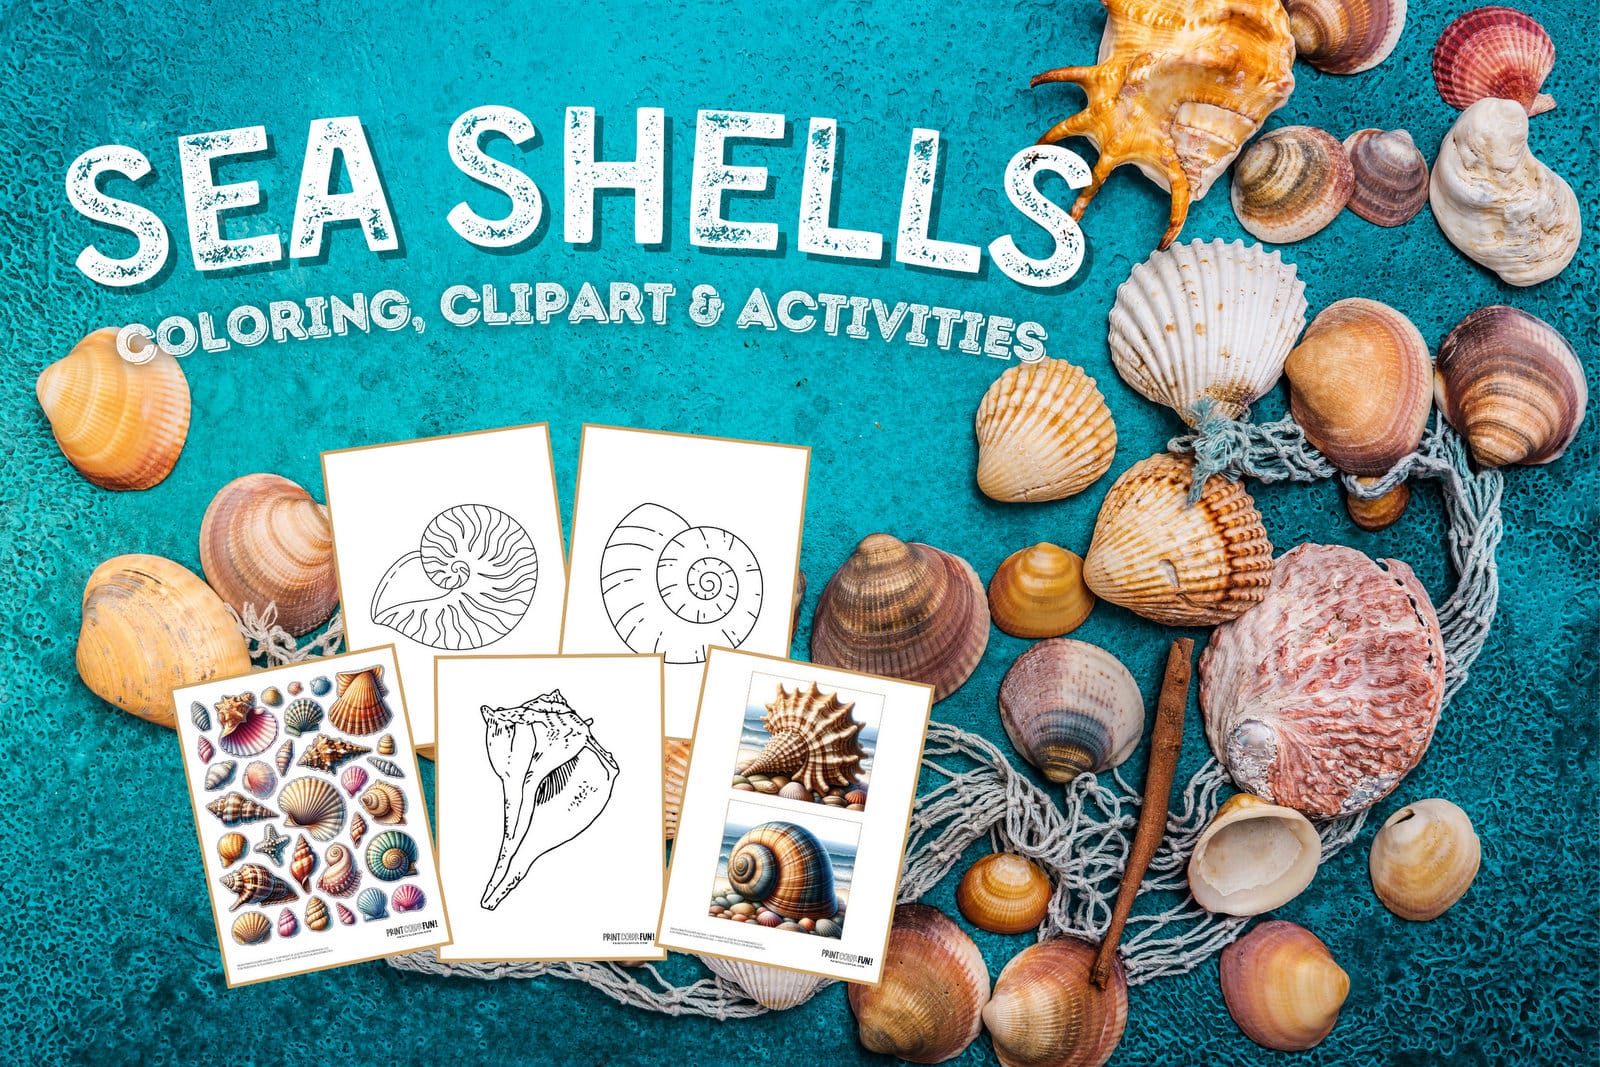 Seashells coloring page clipart activities from PrintColorFun com